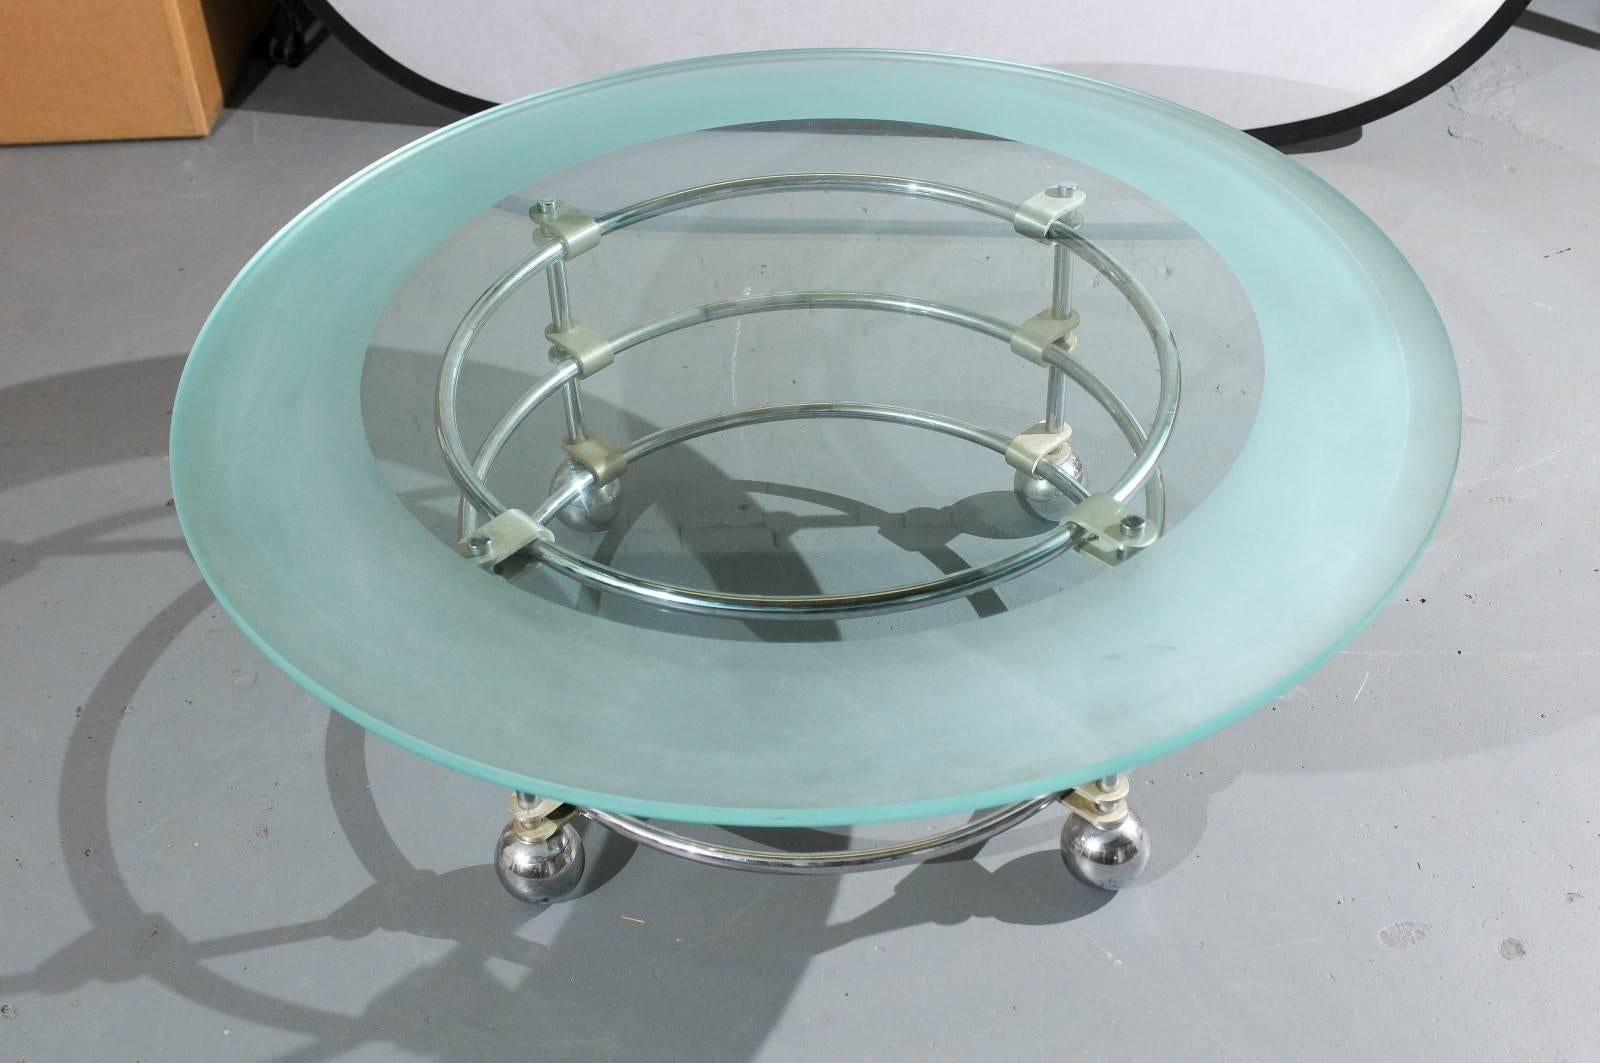 Aluminum Jay Spectre for Century Chrome and Glass Coffee Table  For Sale